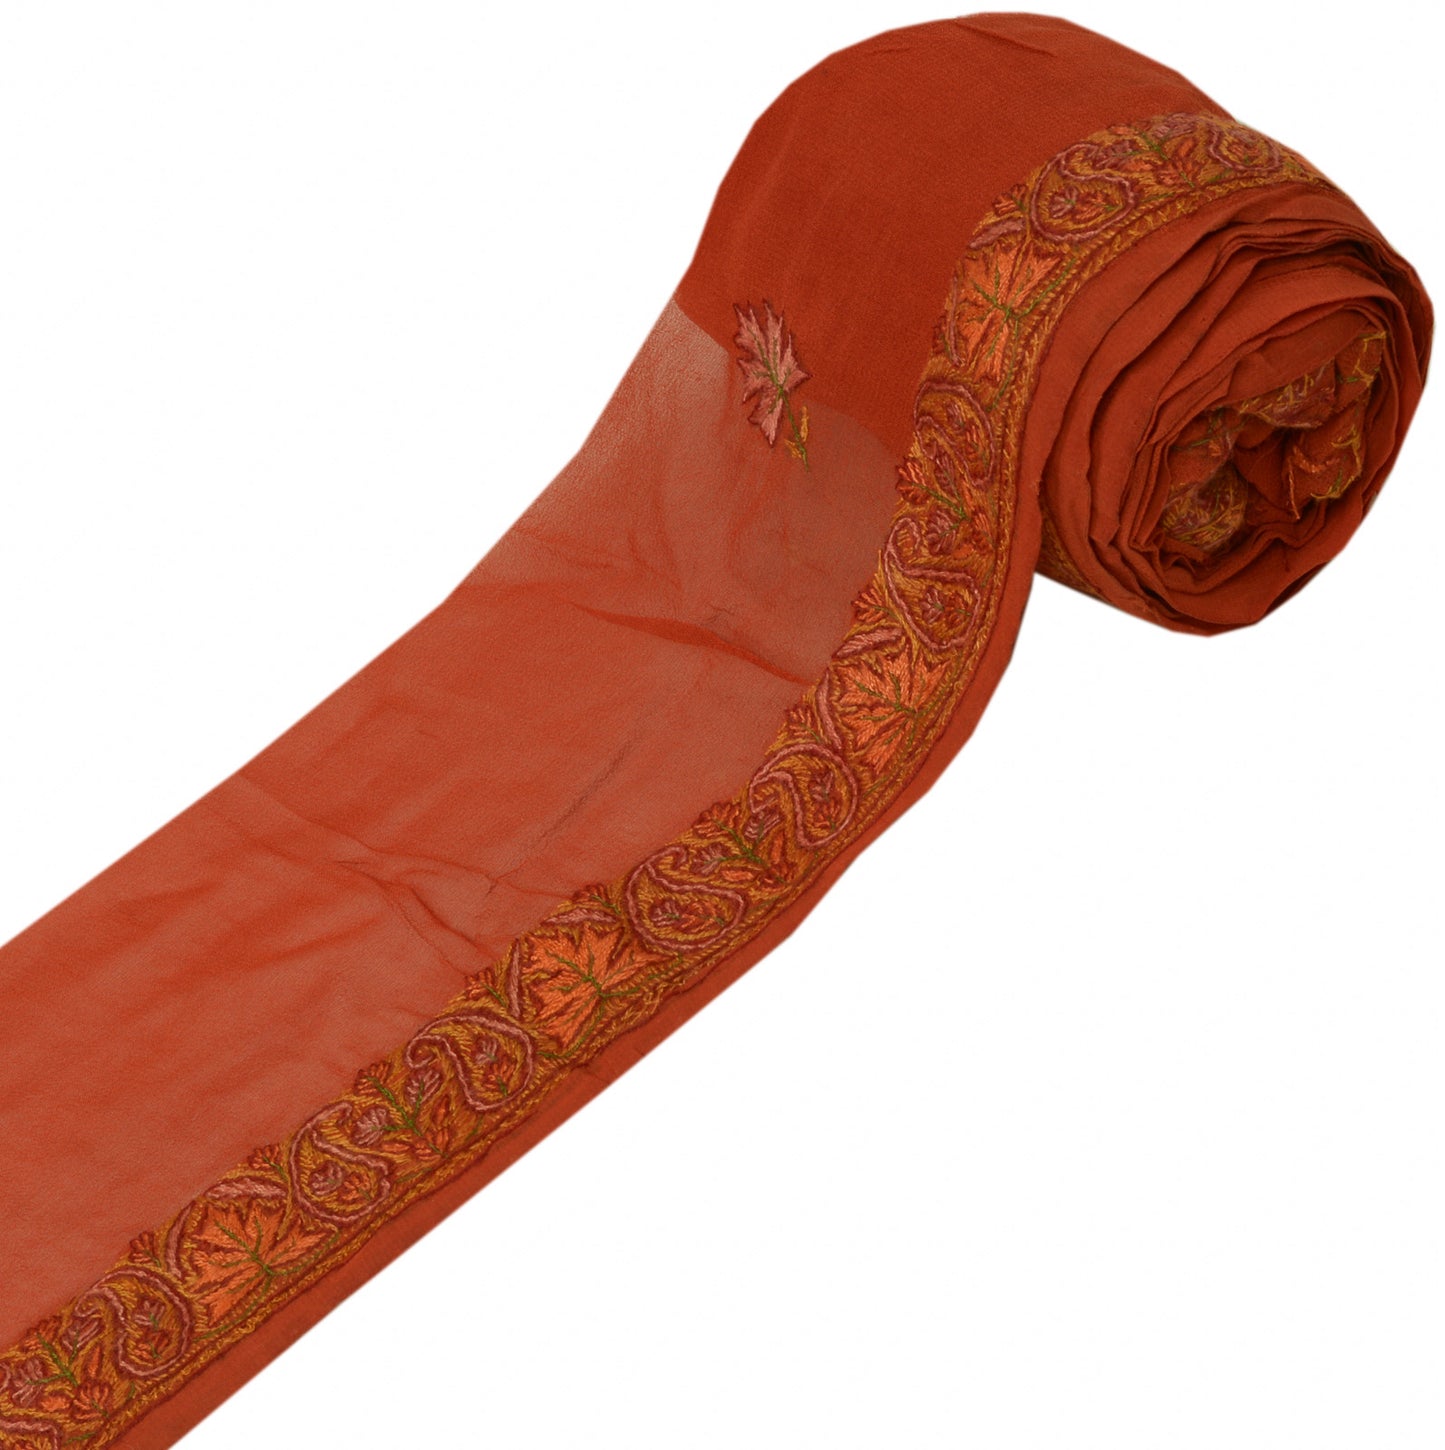 Sushila Vintage Rust Sari Border Indian Craft Sewing Trim Hand Embroidered Lace